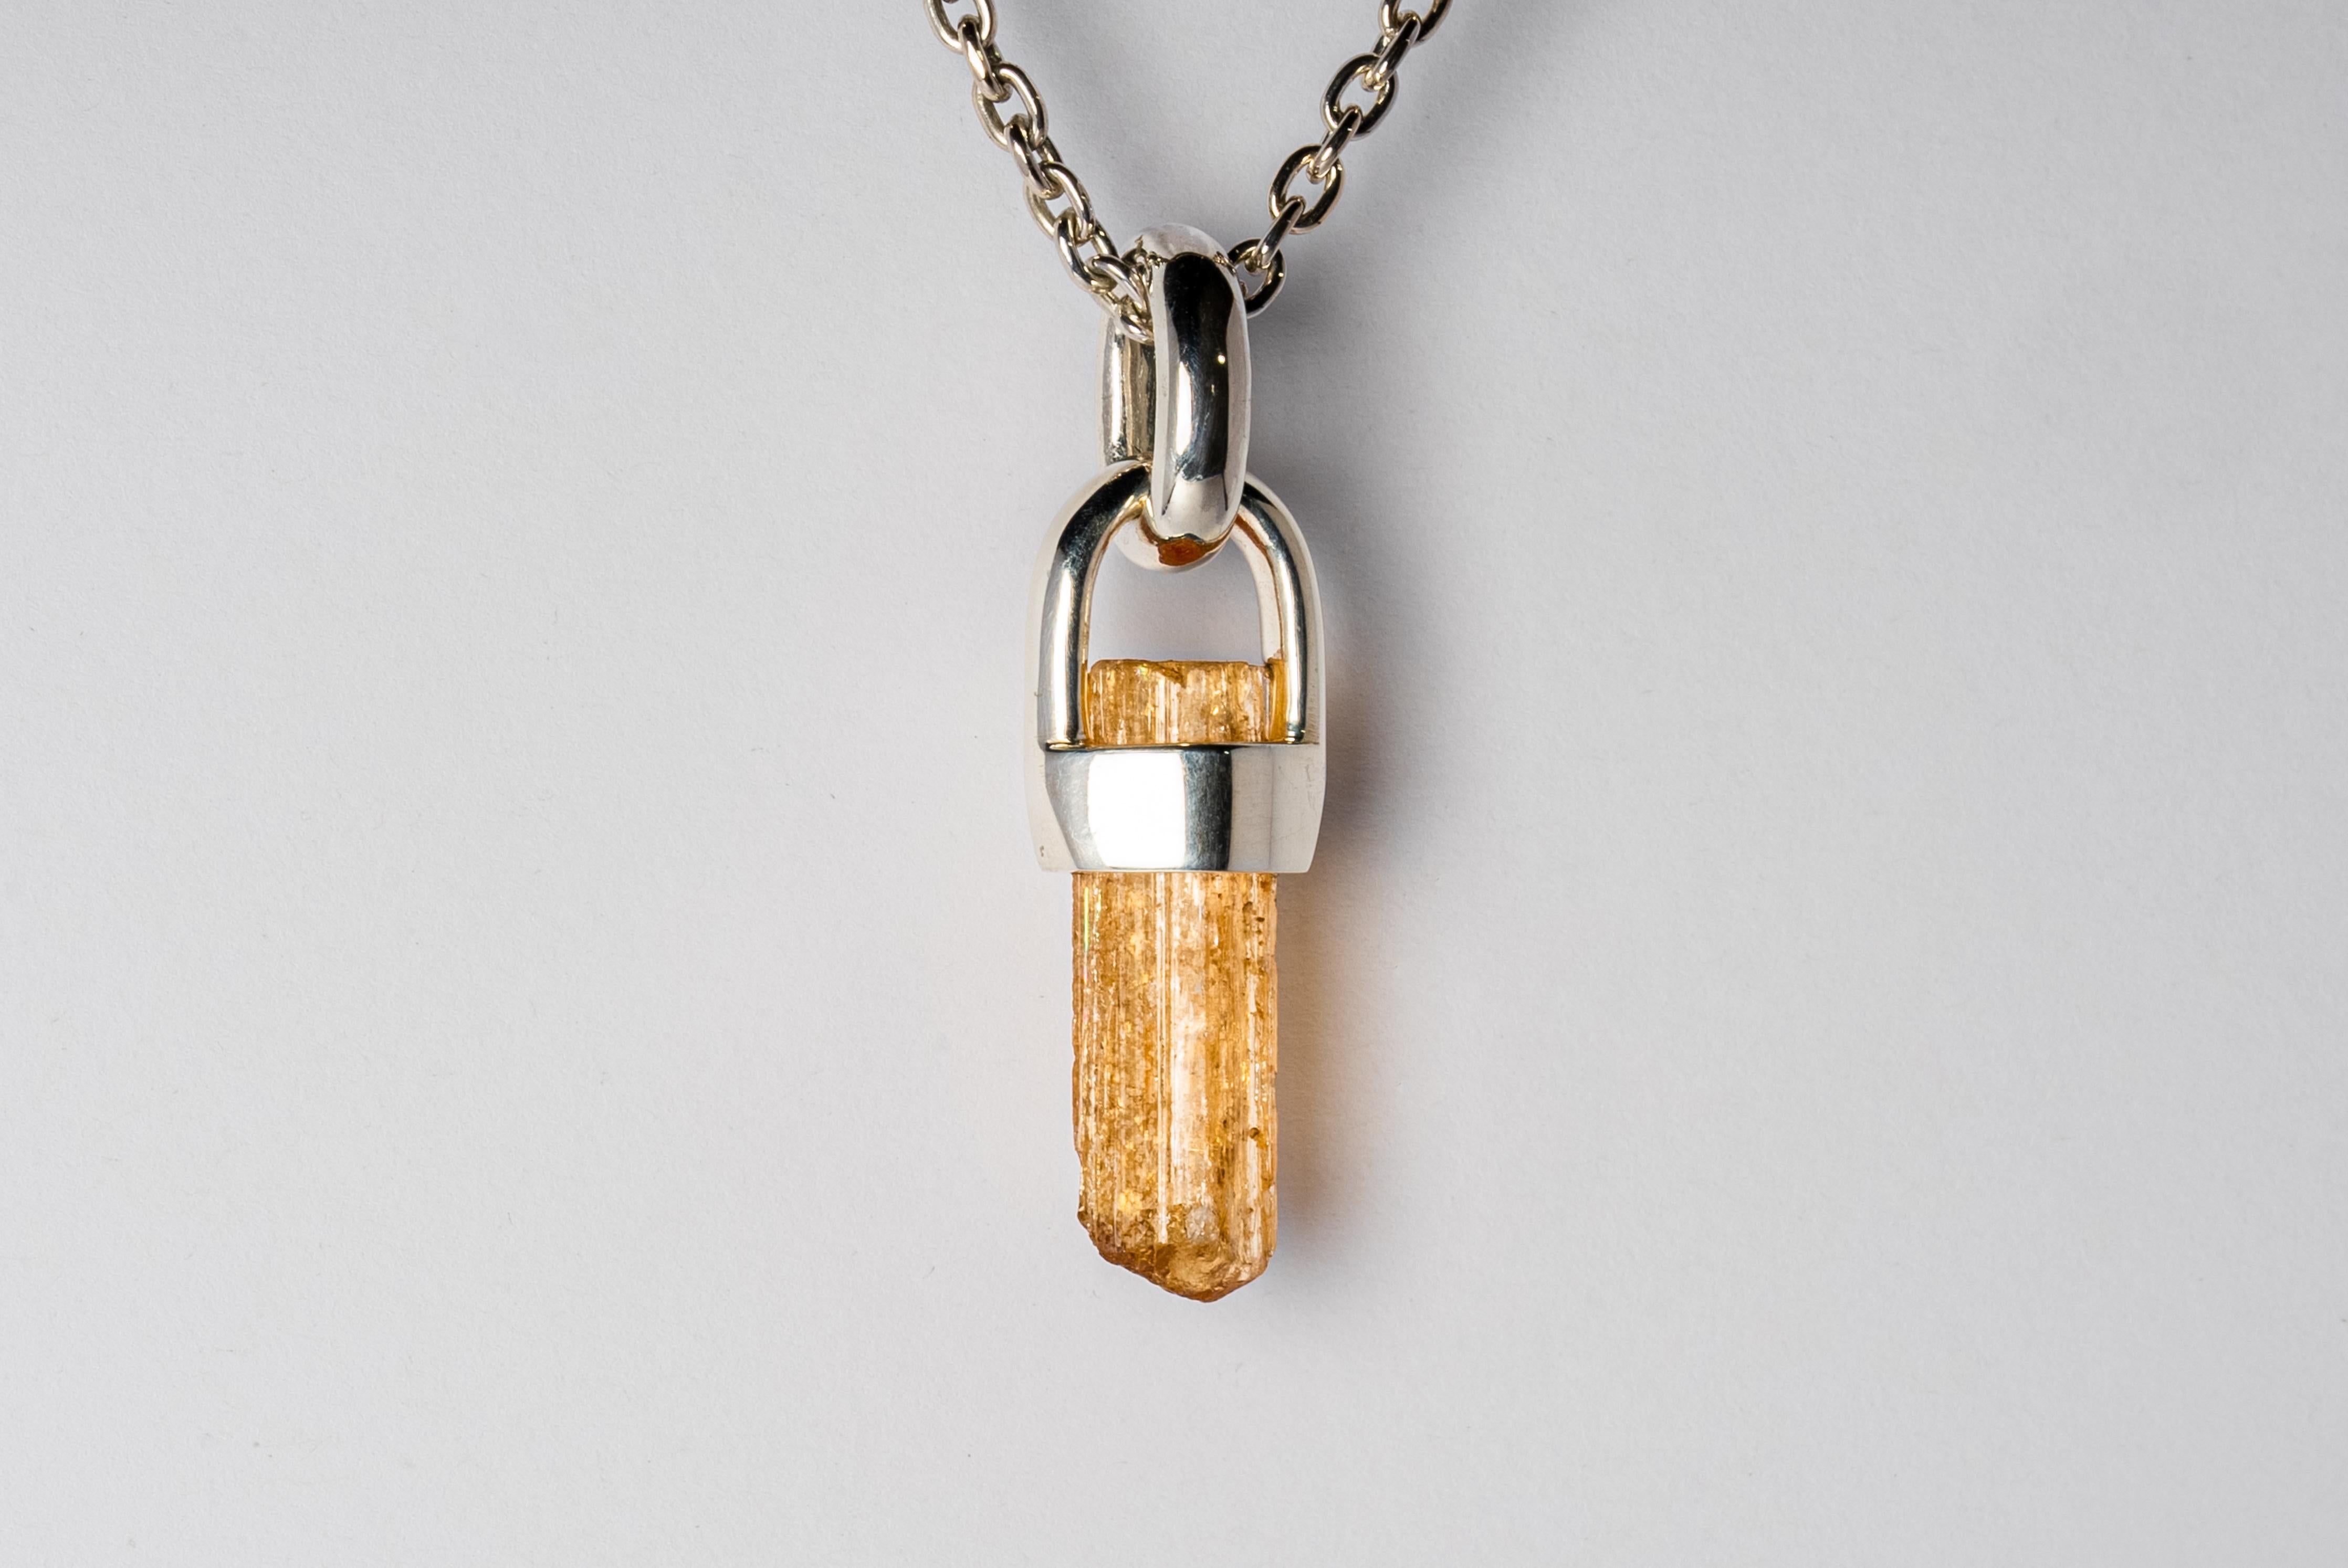 Necklace in polished sterling silver and a rough of imperial topaz on brace-held. The Talisman series is an exploration into the power of natural crystals. The crystals used in these pieces are discovered through adventure and are hand selected.